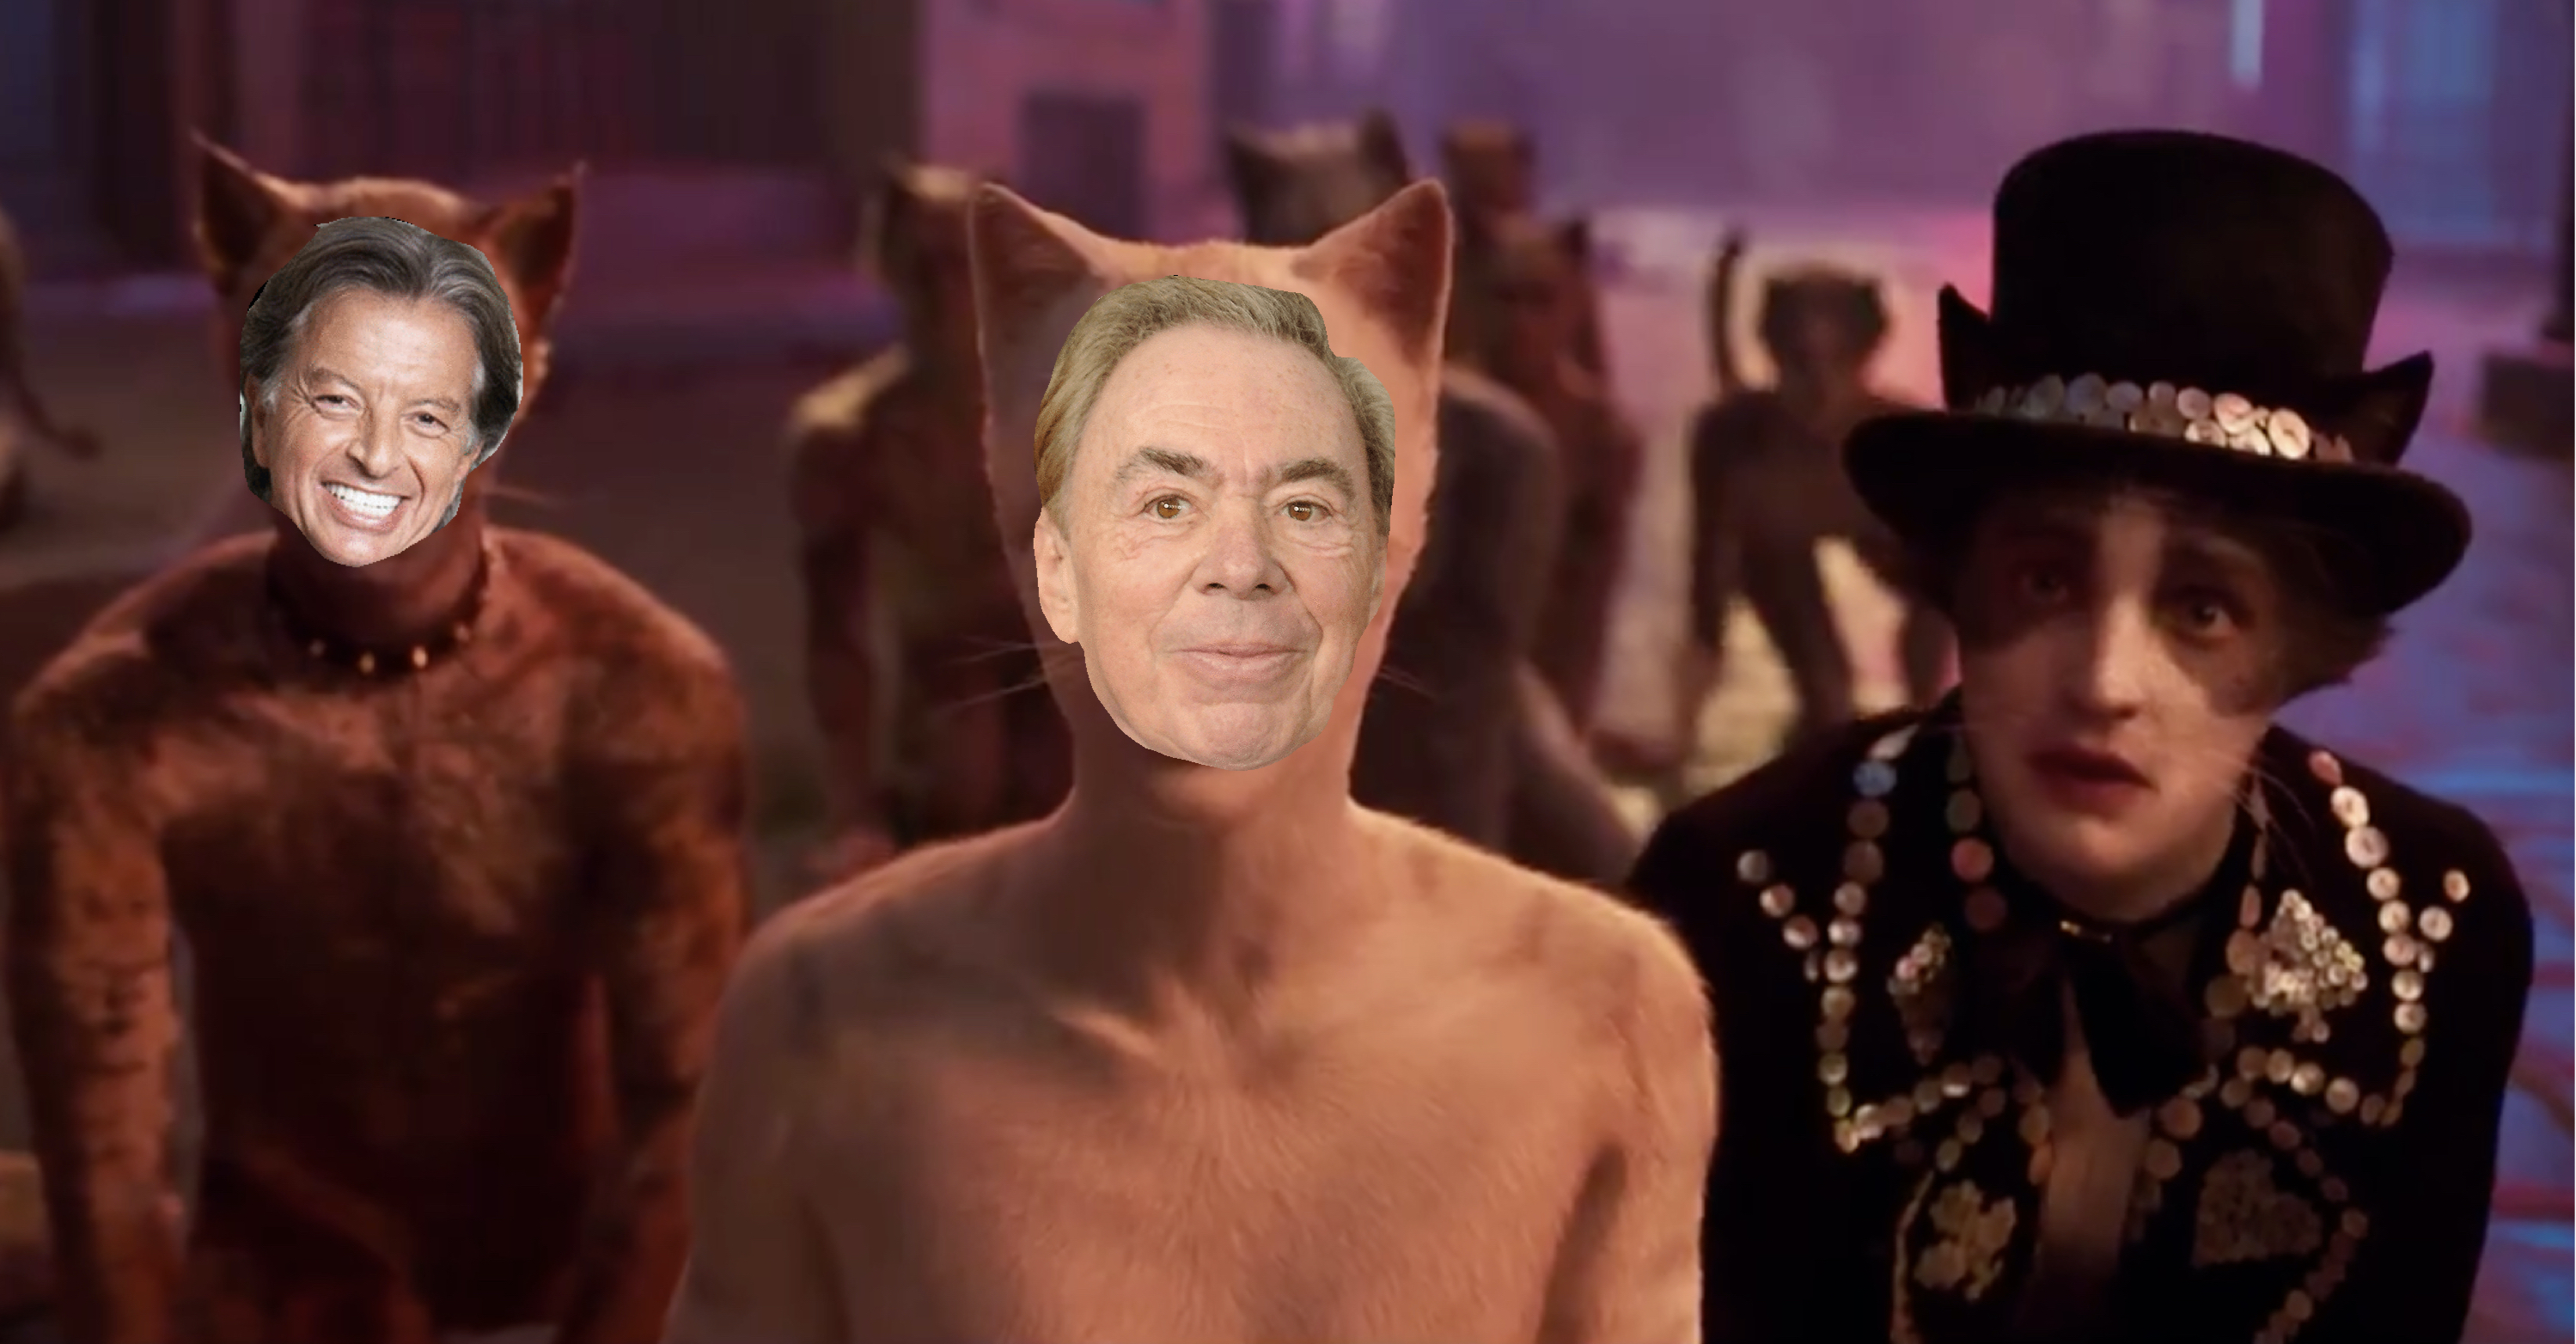 Andrew Lloyd Webber and Richard Caring superimposed on to Cats